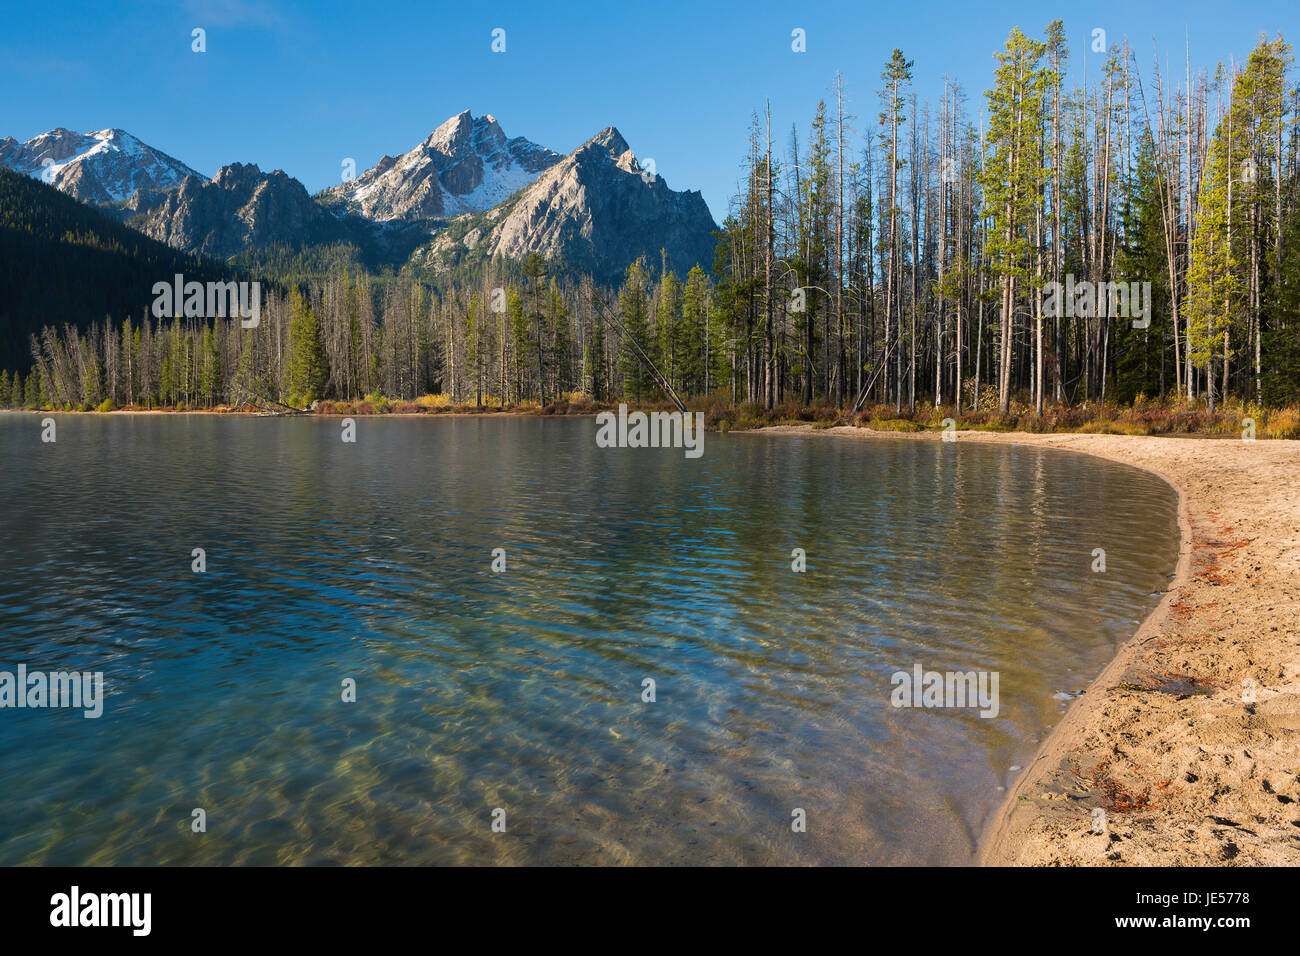 https://c8.alamy.com/comp/JE5778/the-sawtooth-mountains-rise-over-stanley-lake-in-idaho-on-a-clear-JE5778.jpg